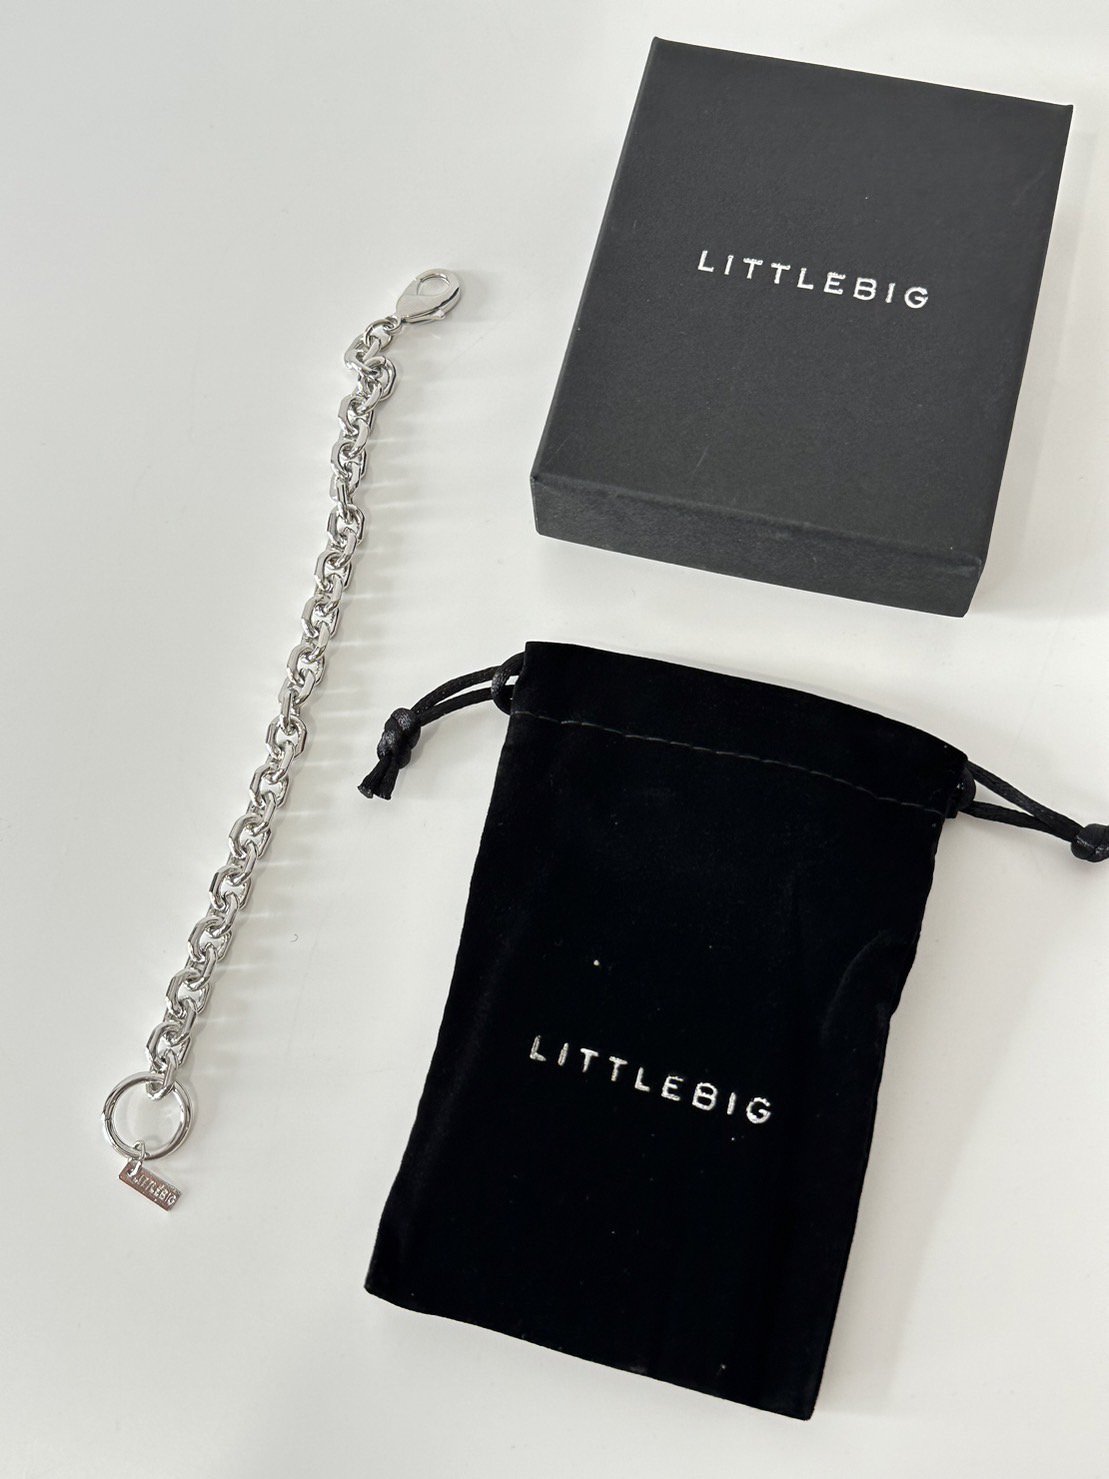 LITTLEBIG<br />Hexagon Bracelet / Silver<img class='new_mark_img2' src='https://img.shop-pro.jp/img/new/icons14.gif' style='border:none;display:inline;margin:0px;padding:0px;width:auto;' />